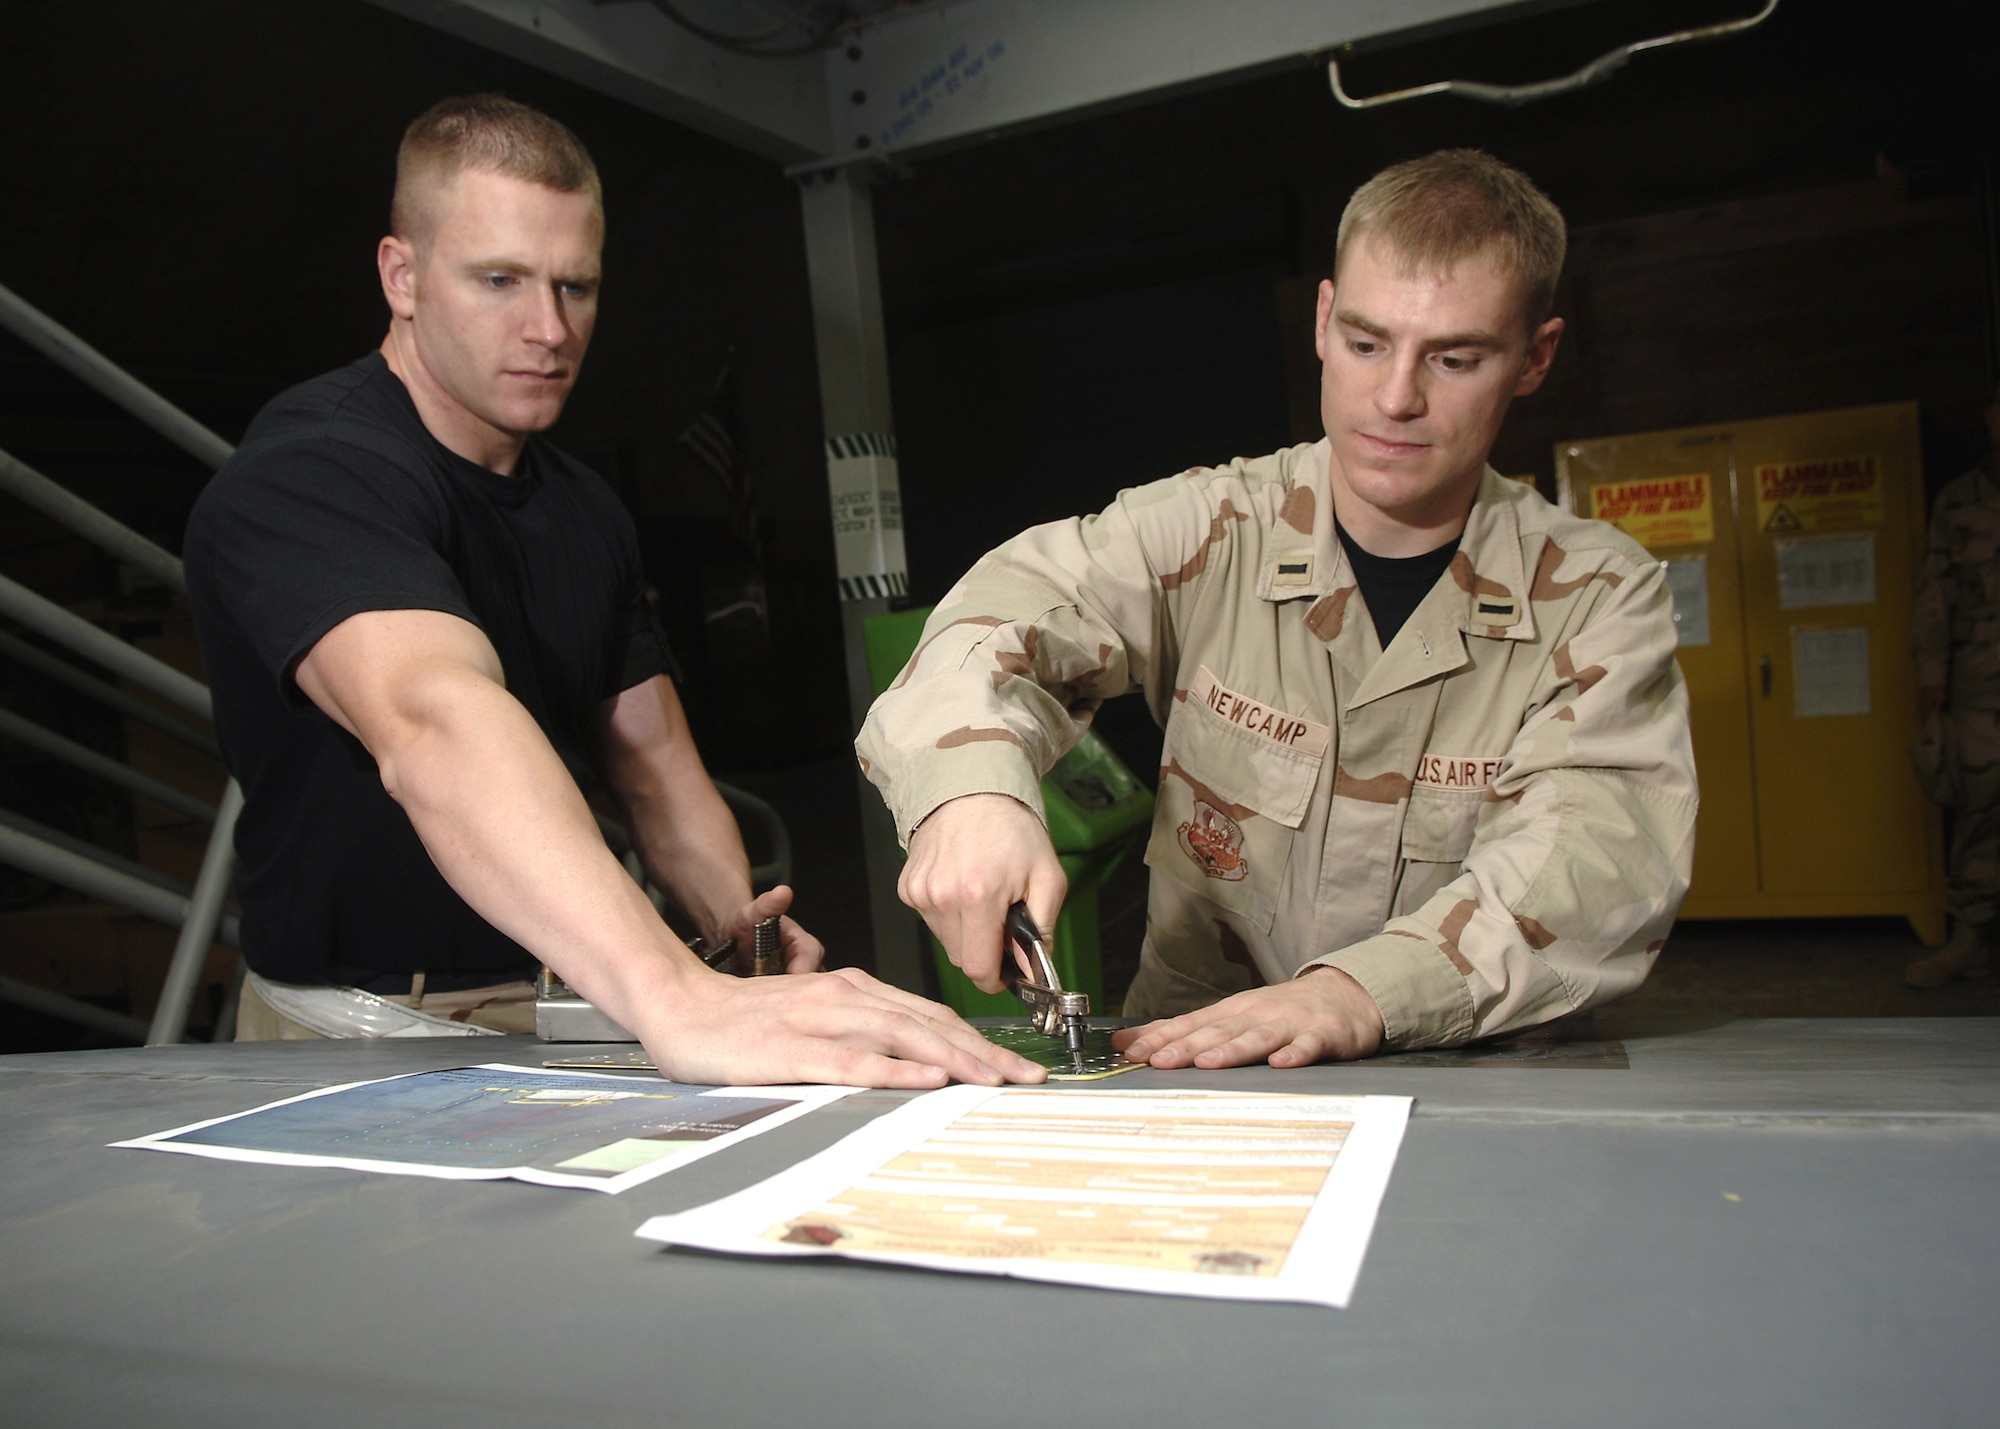 Staff Sgt. Shawn Krah (left), an aircraft structural maintenance craftsman with the 379th Expeditionary Maintenance Squadron, discusses one-time flight options for a damaged flap on a B-1 Lancer with 1st Lt. Jeffrey Newcamp, a depot liaison engineer with the 379th Expeditionary Maintenance Operations Squadron. (U.S. Air Force photo/Senior Airman Ricky Best) 